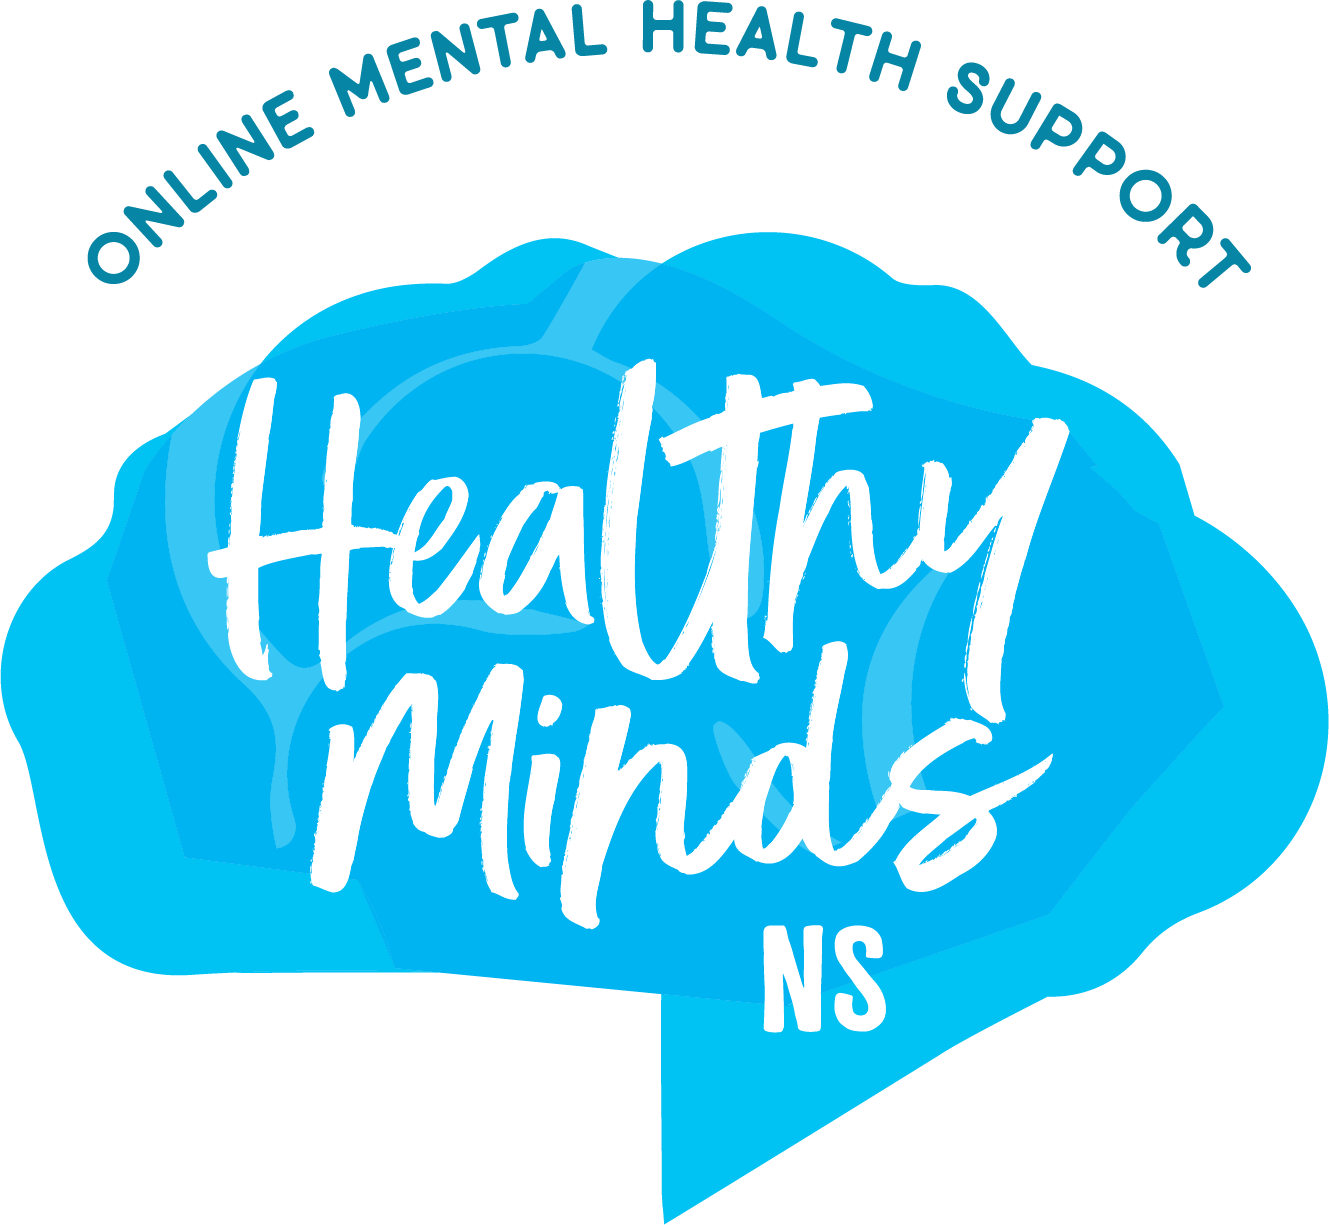 Healthy Minds NS